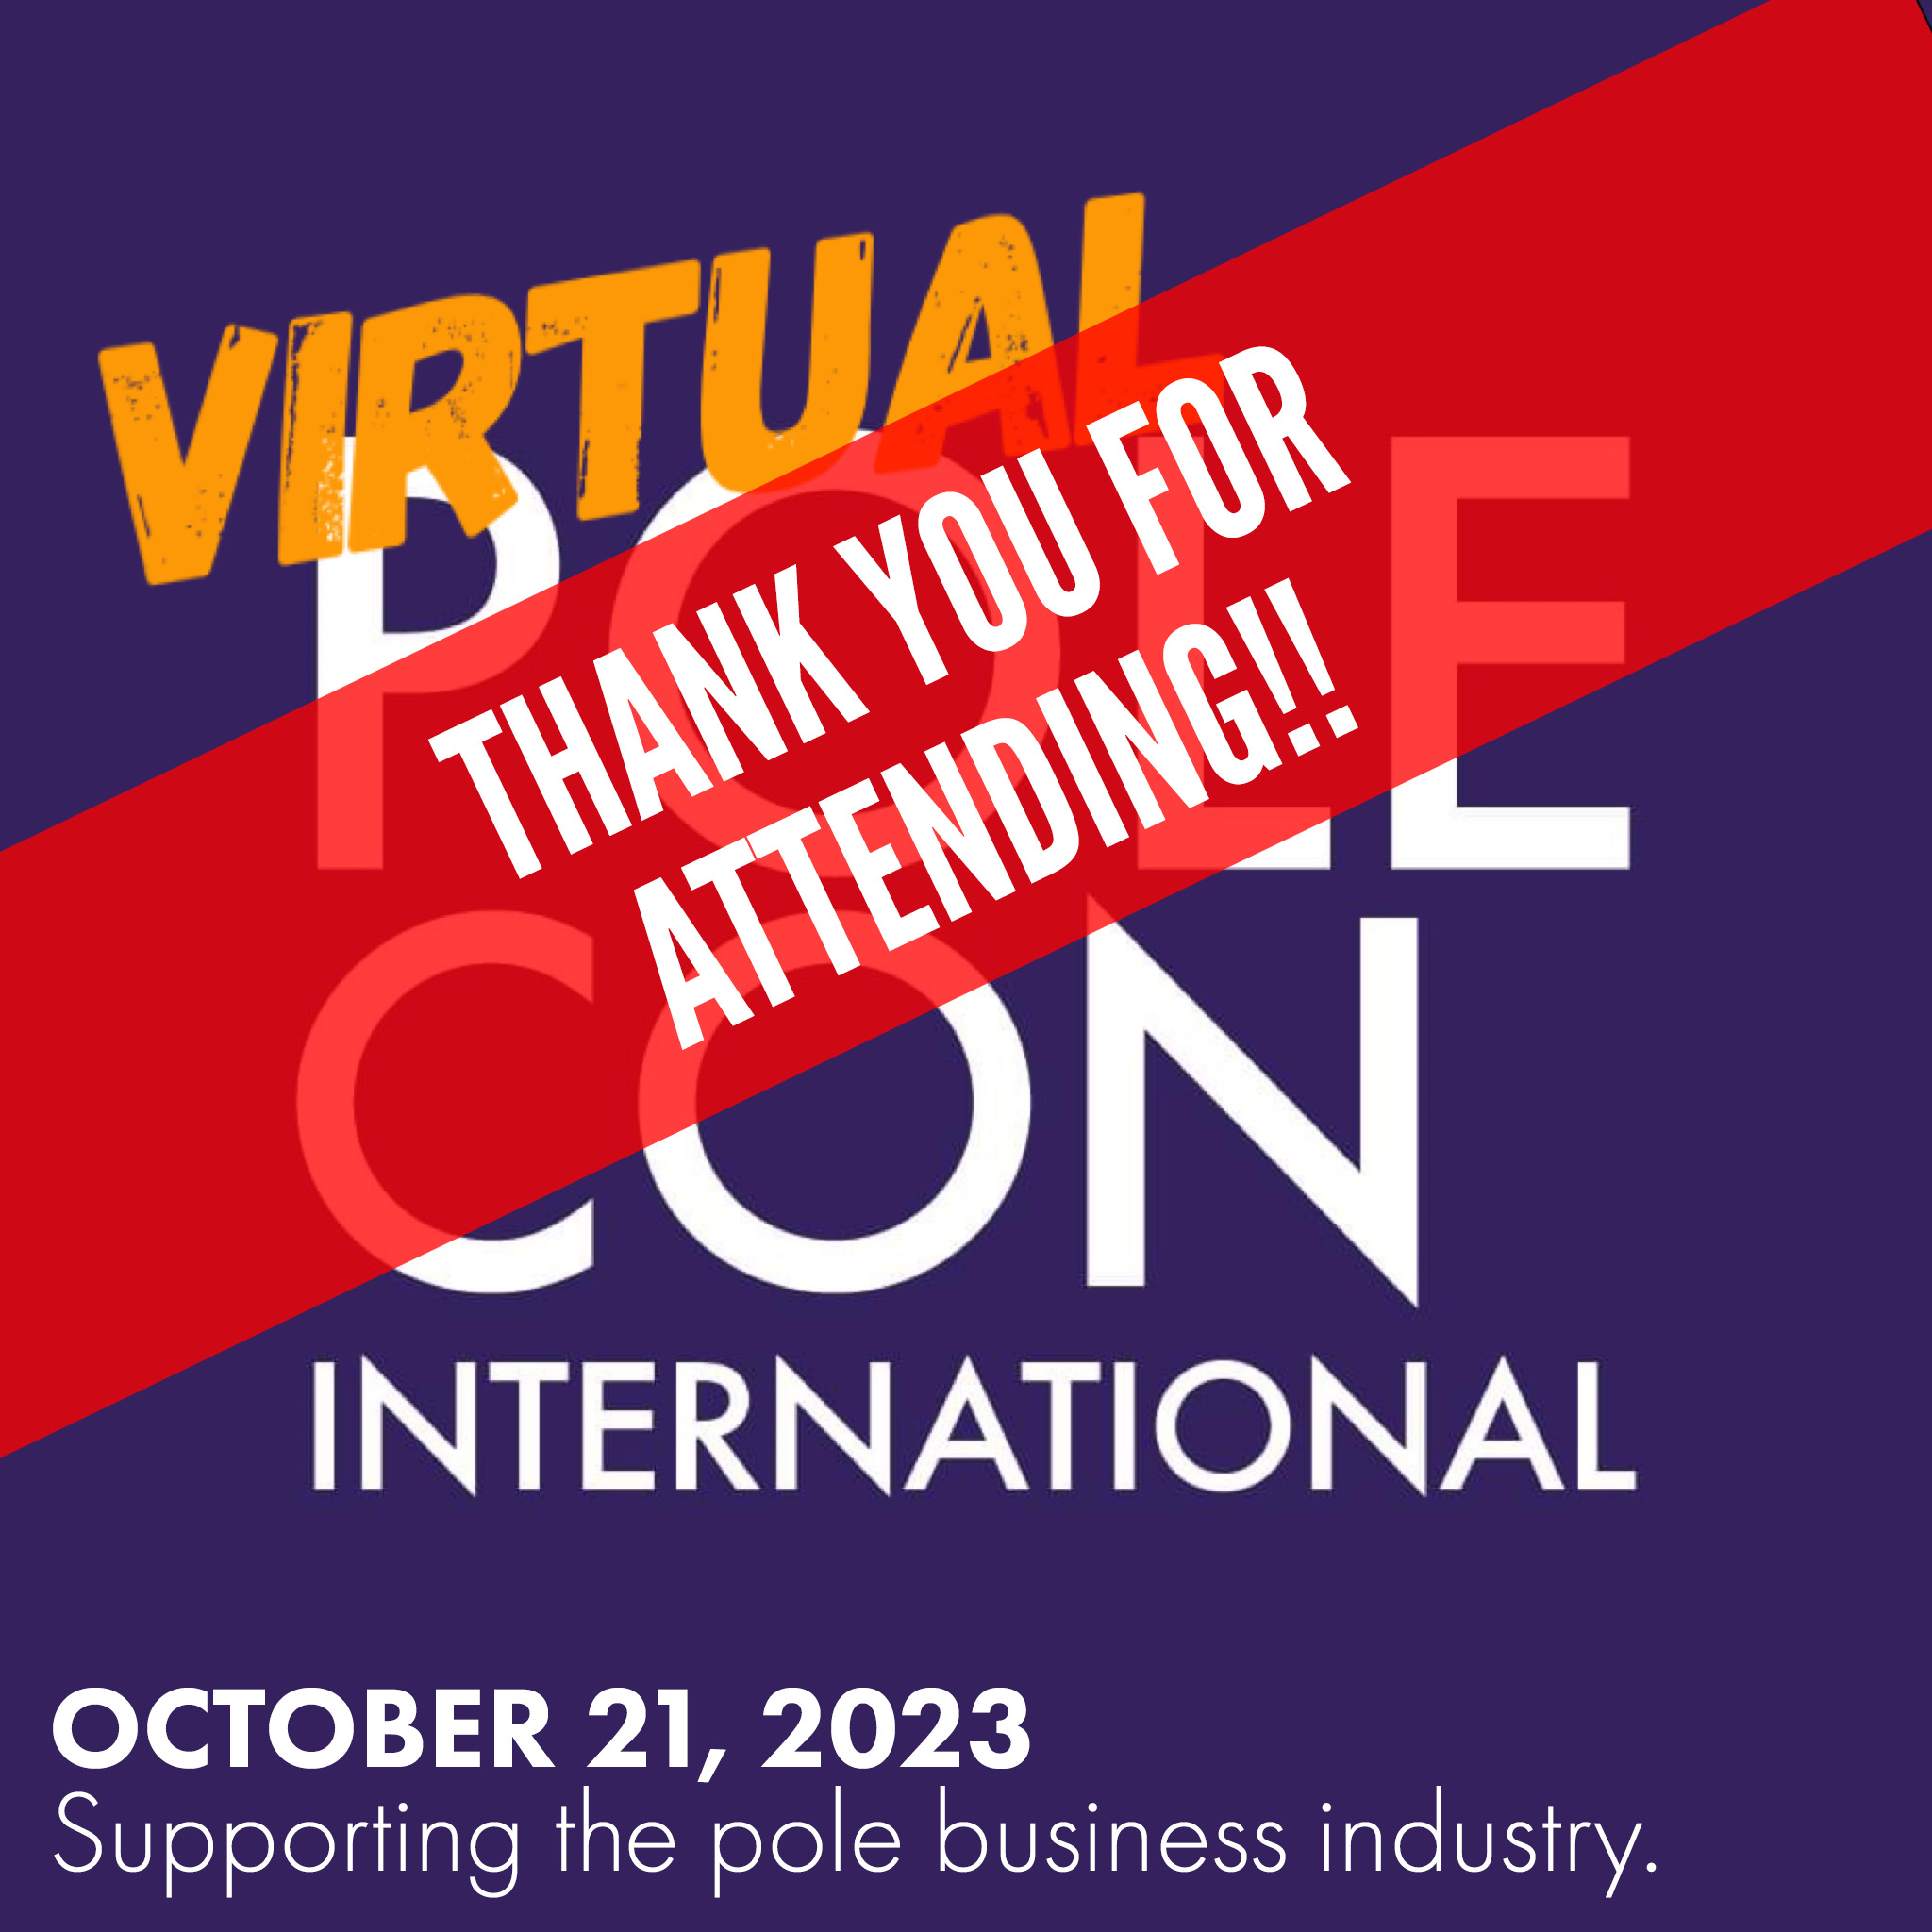 Virtual PoleCon logo with text "thank you for attending!" Oct 2023